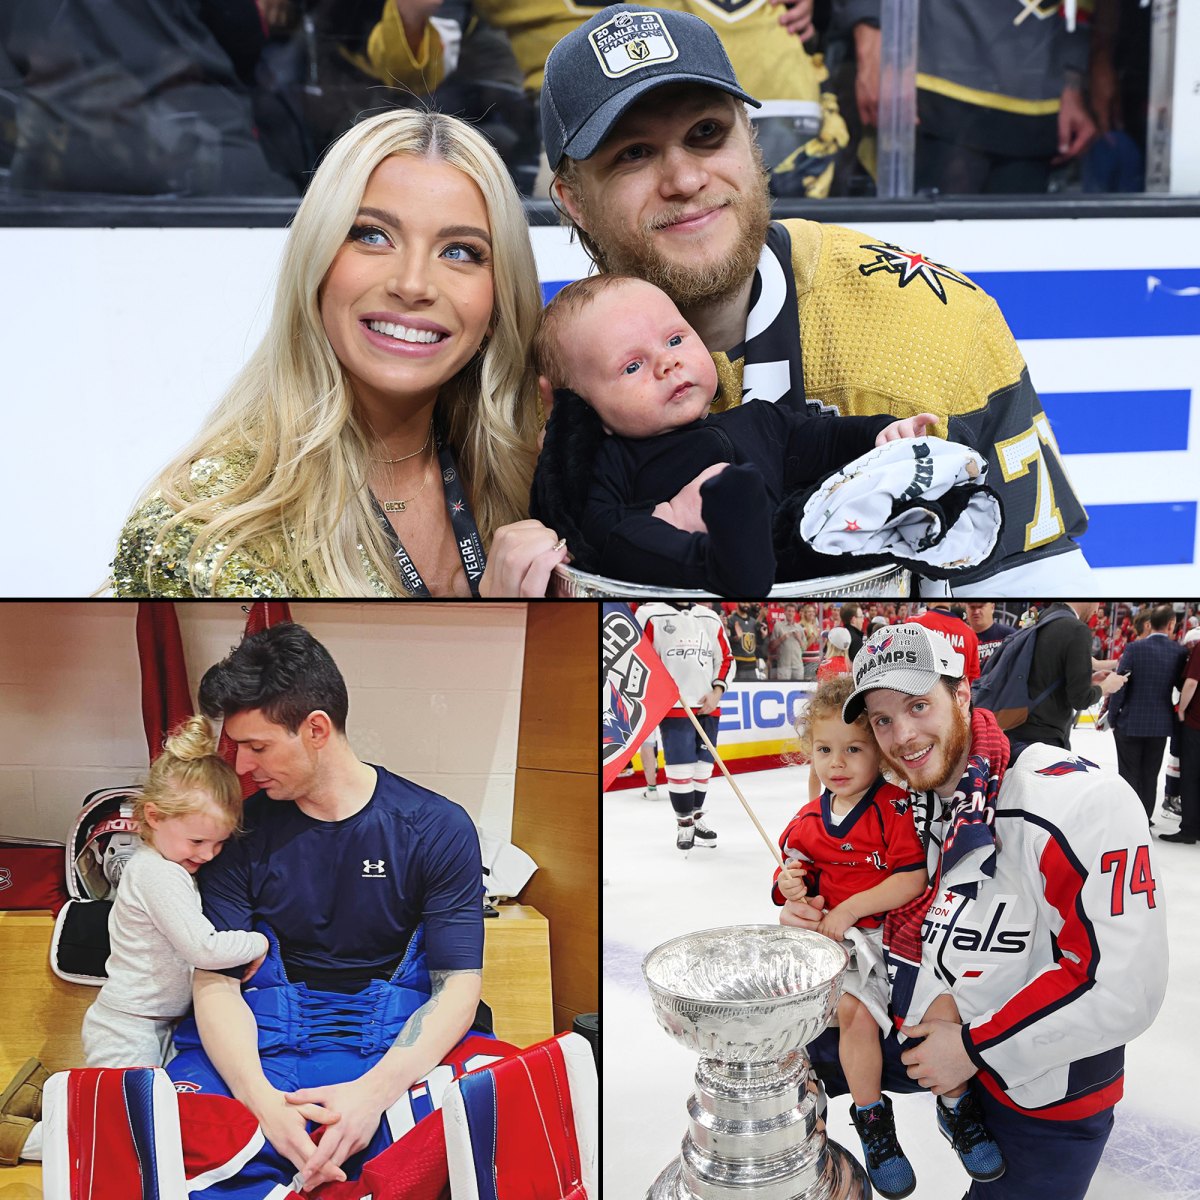 https://www.usmagazine.com/wp-content/uploads/2023/10/Hottest-NHL-Dads-Hockey-Players-Whose-Kids-Are-Their-Number-One-Fans.jpg?w=1200&quality=86&strip=all